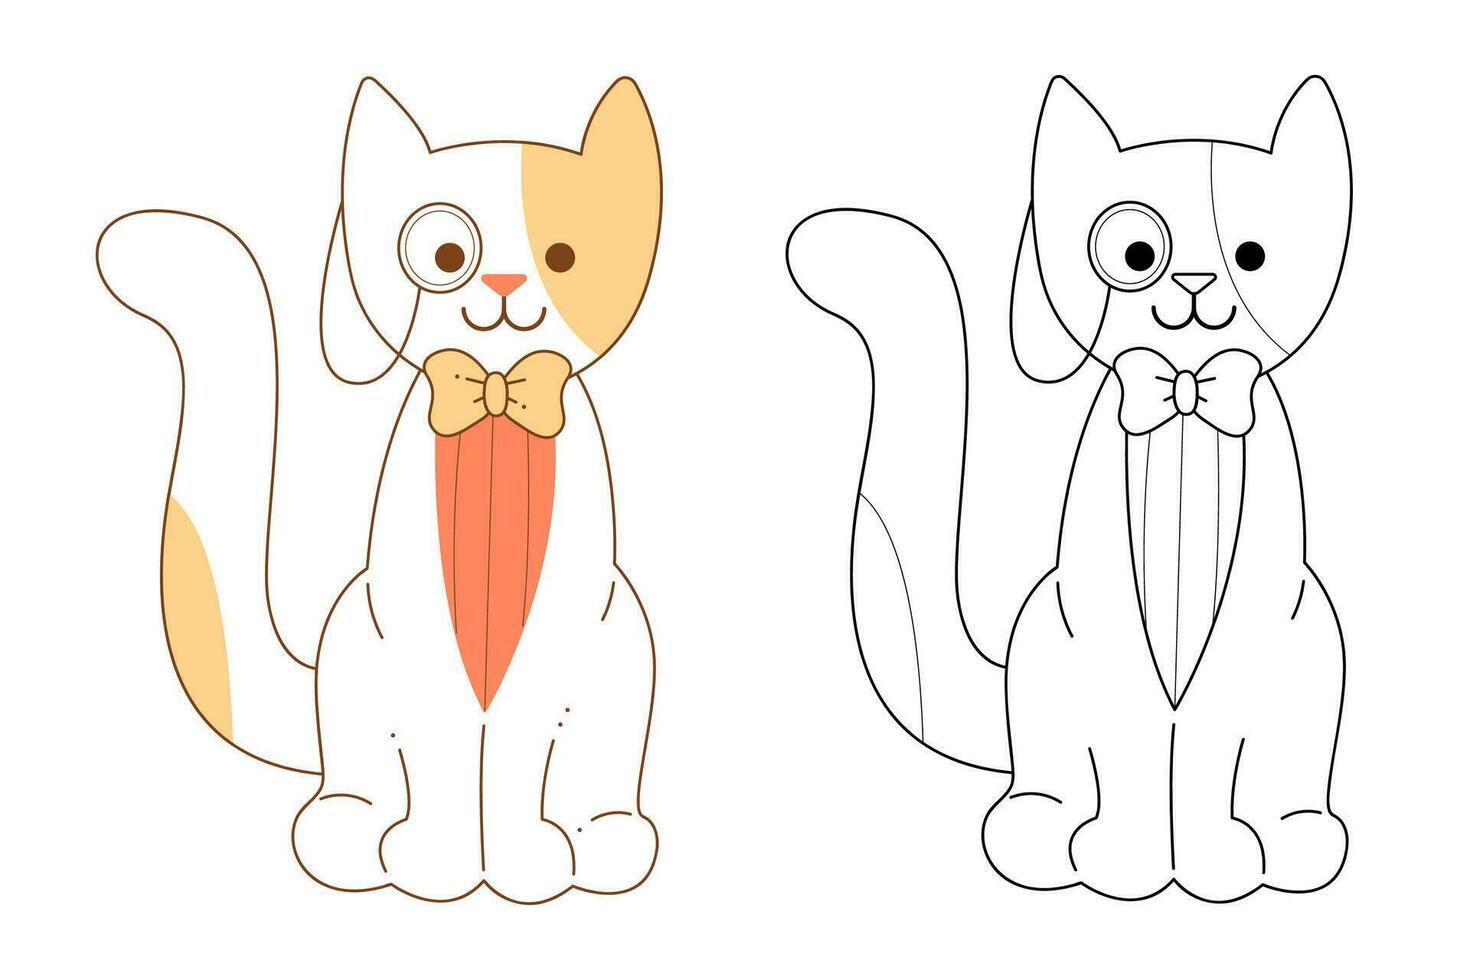 Cute cat character with monocle and bow tie. Flat color and black and white vector illustration.